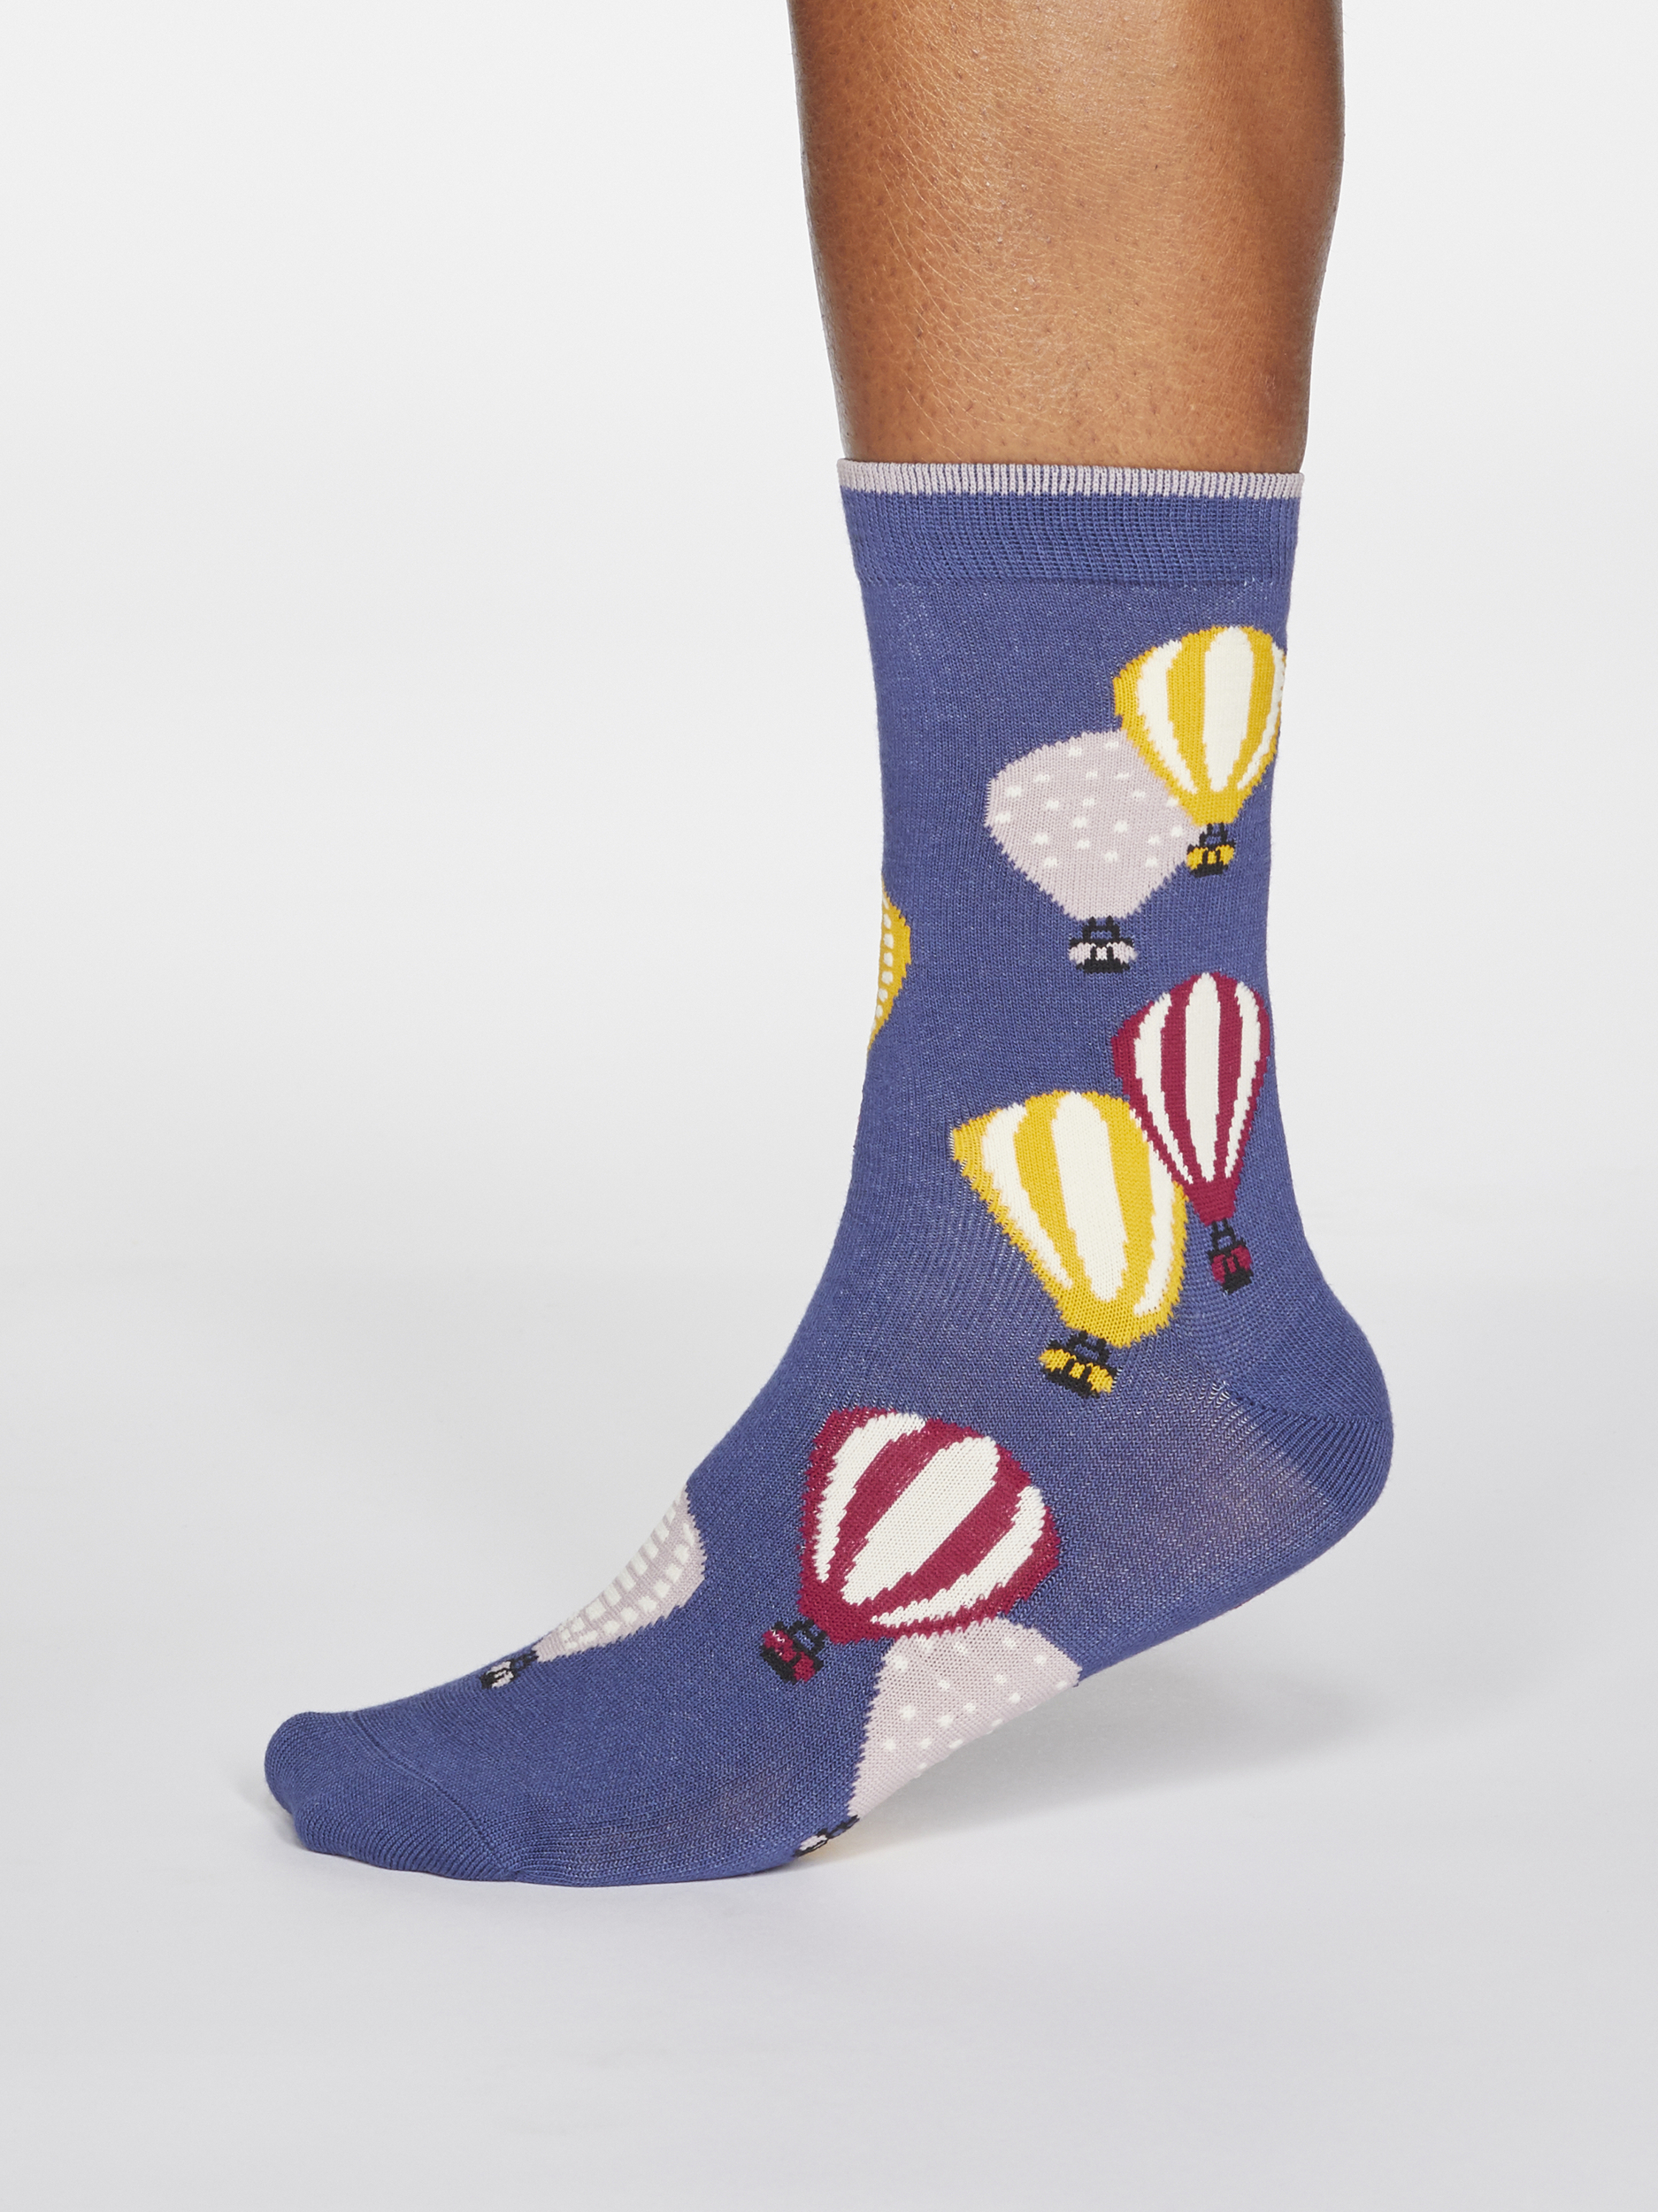 SPW593-MINERAL-BLUE--Louise-Air-Balloon-Bamboo-Organic-Cotton-Blend-Socks-in-Mineral-Blue-1S